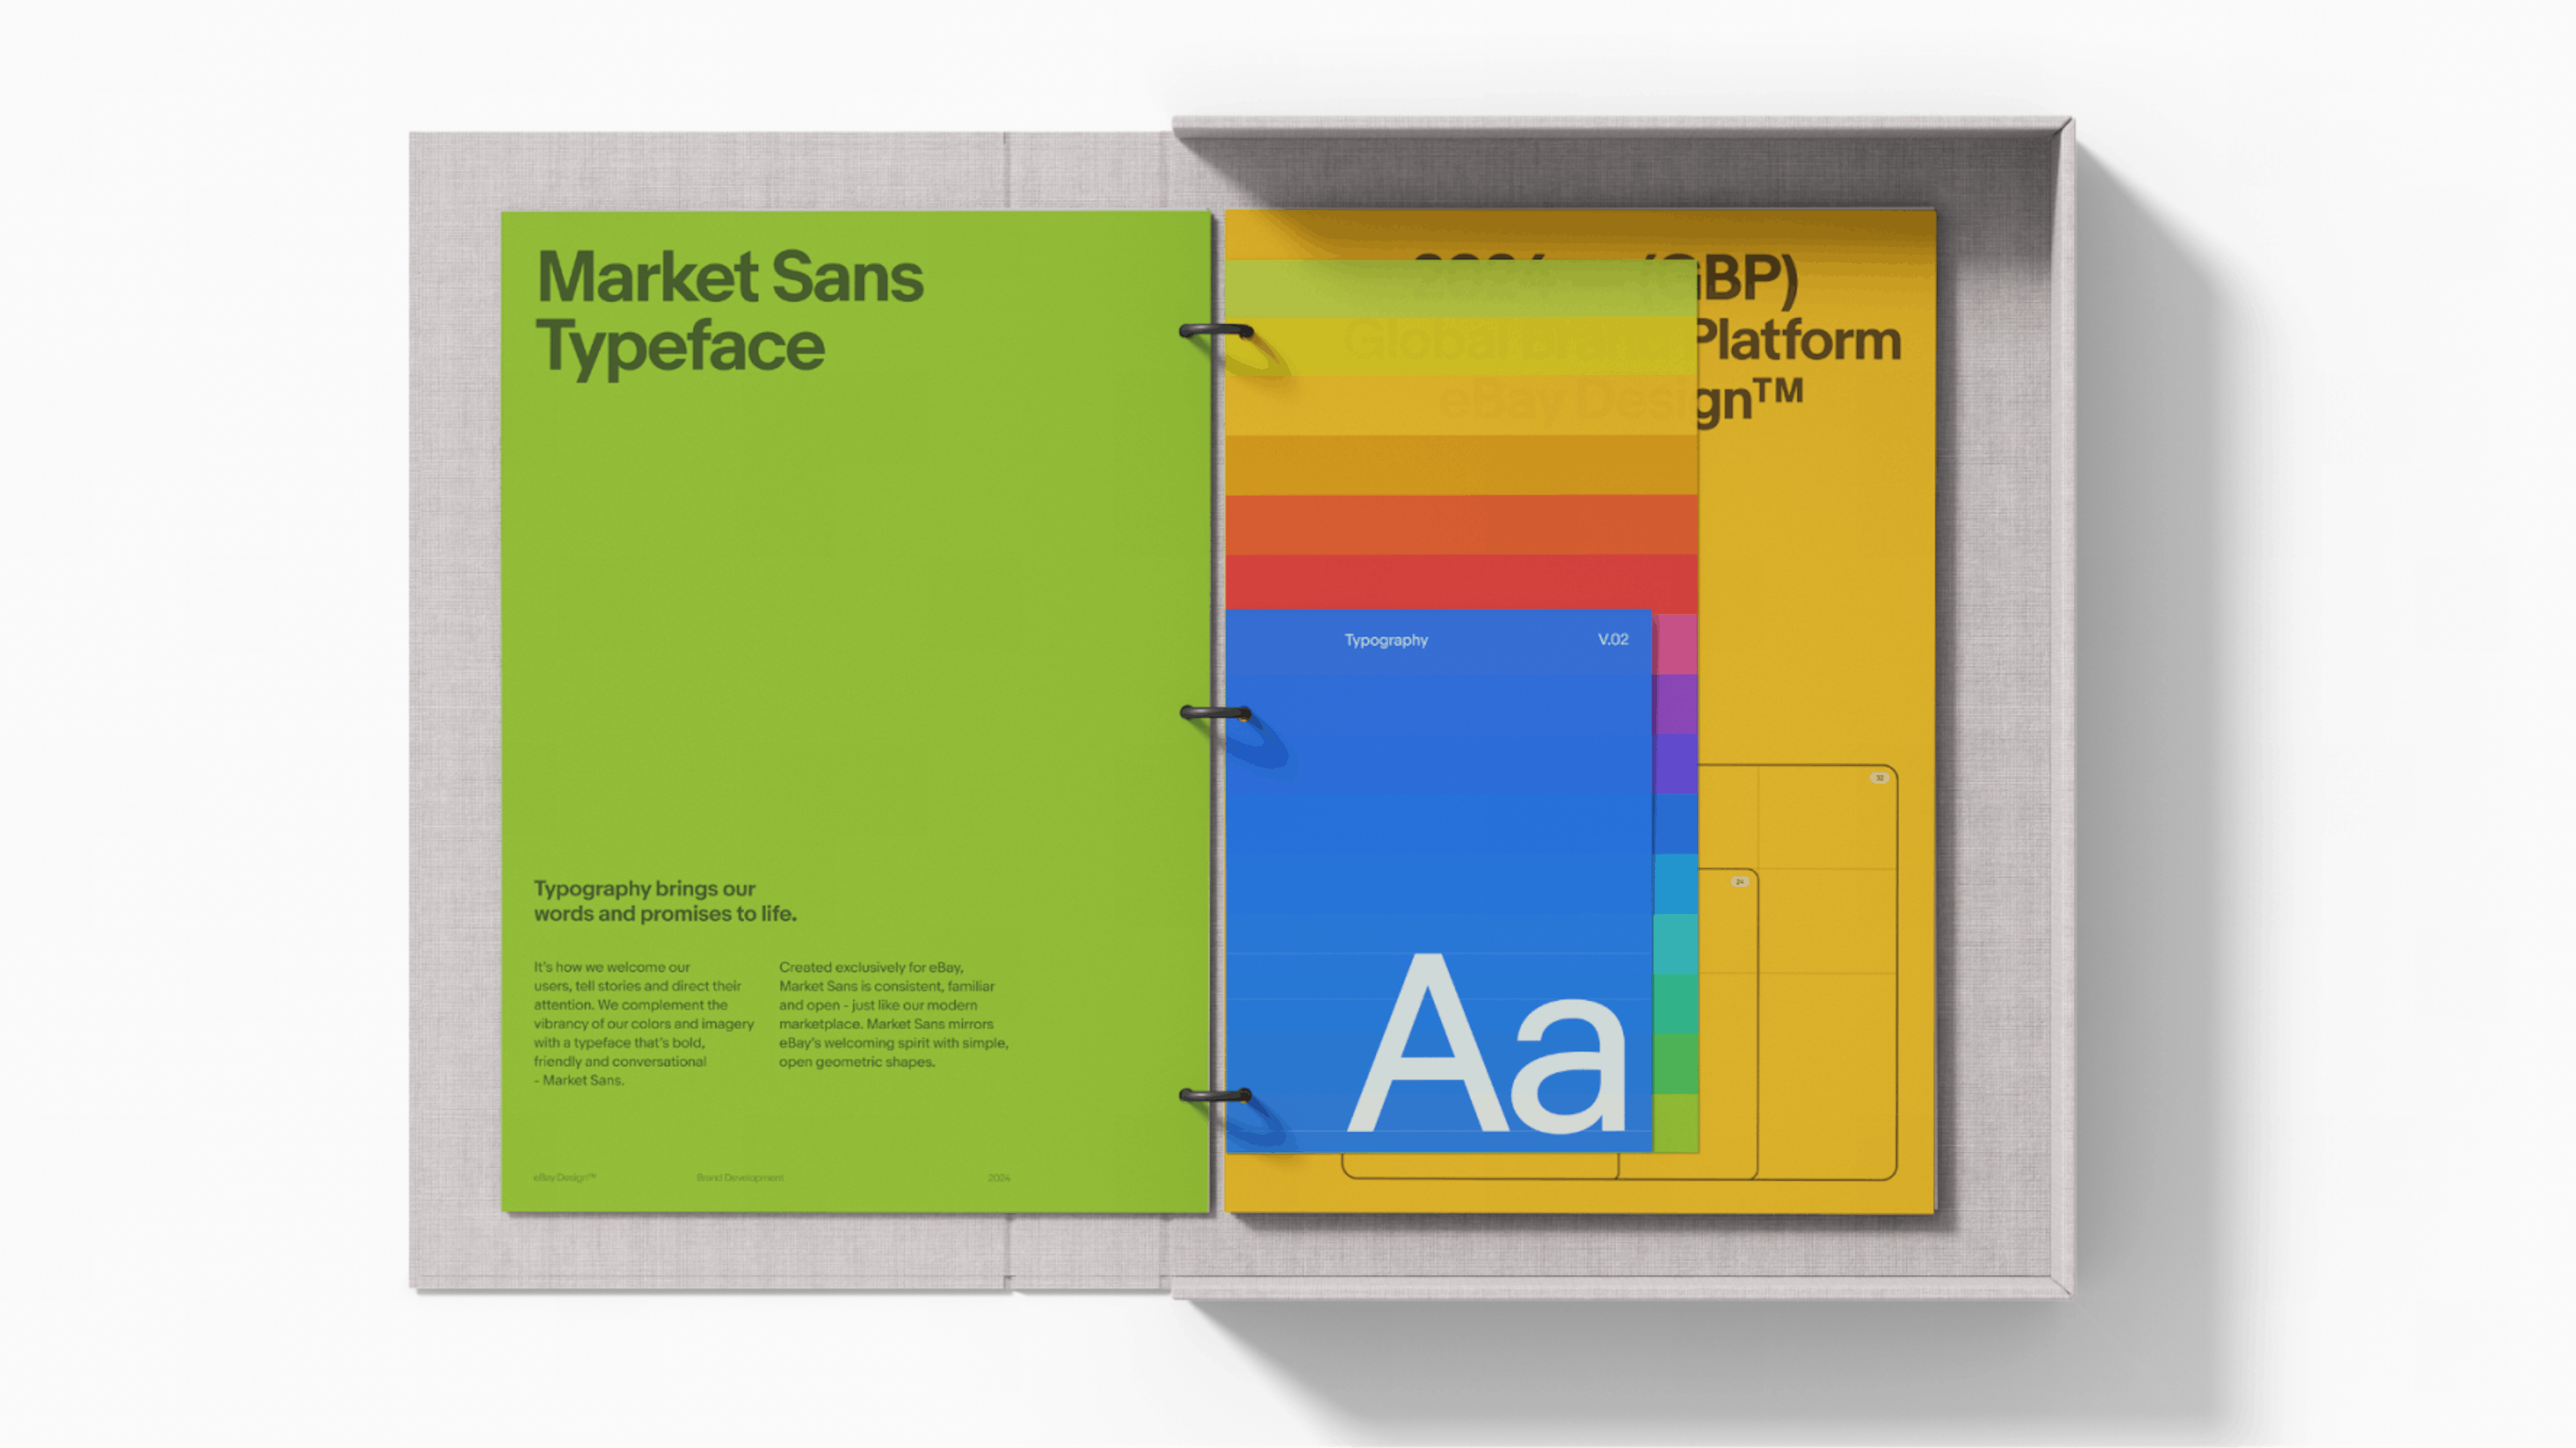 A colorful brand book highlighting the “Market Sans Typeface”. The book is open on a table and colorful pages with type are displayed.